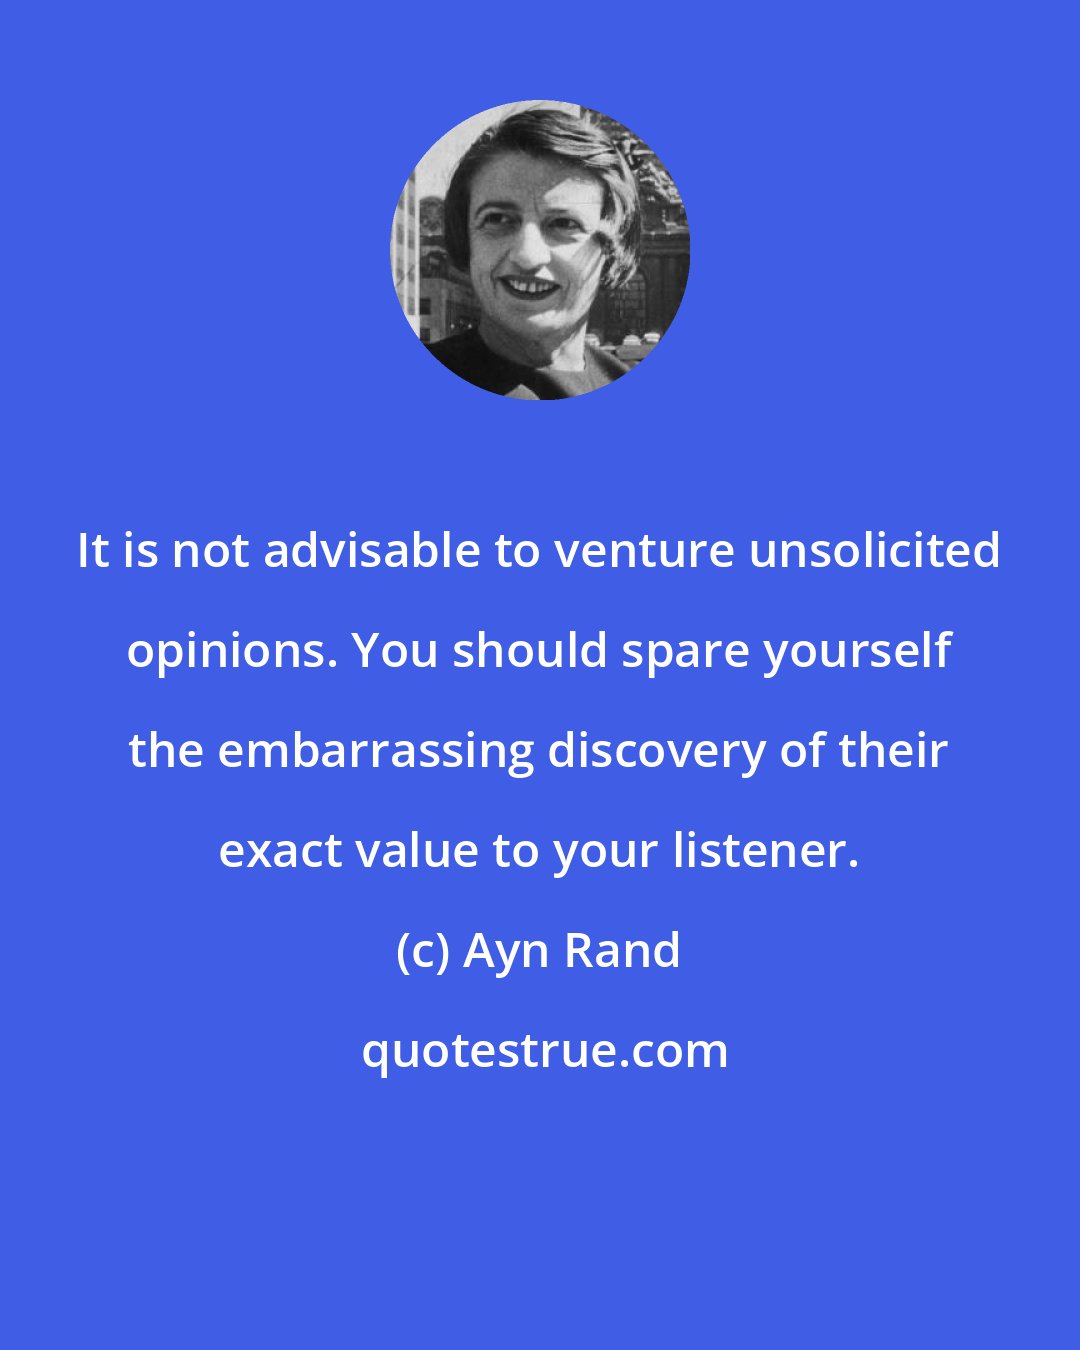 Ayn Rand: It is not advisable to venture unsolicited opinions. You should spare yourself the embarrassing discovery of their exact value to your listener.